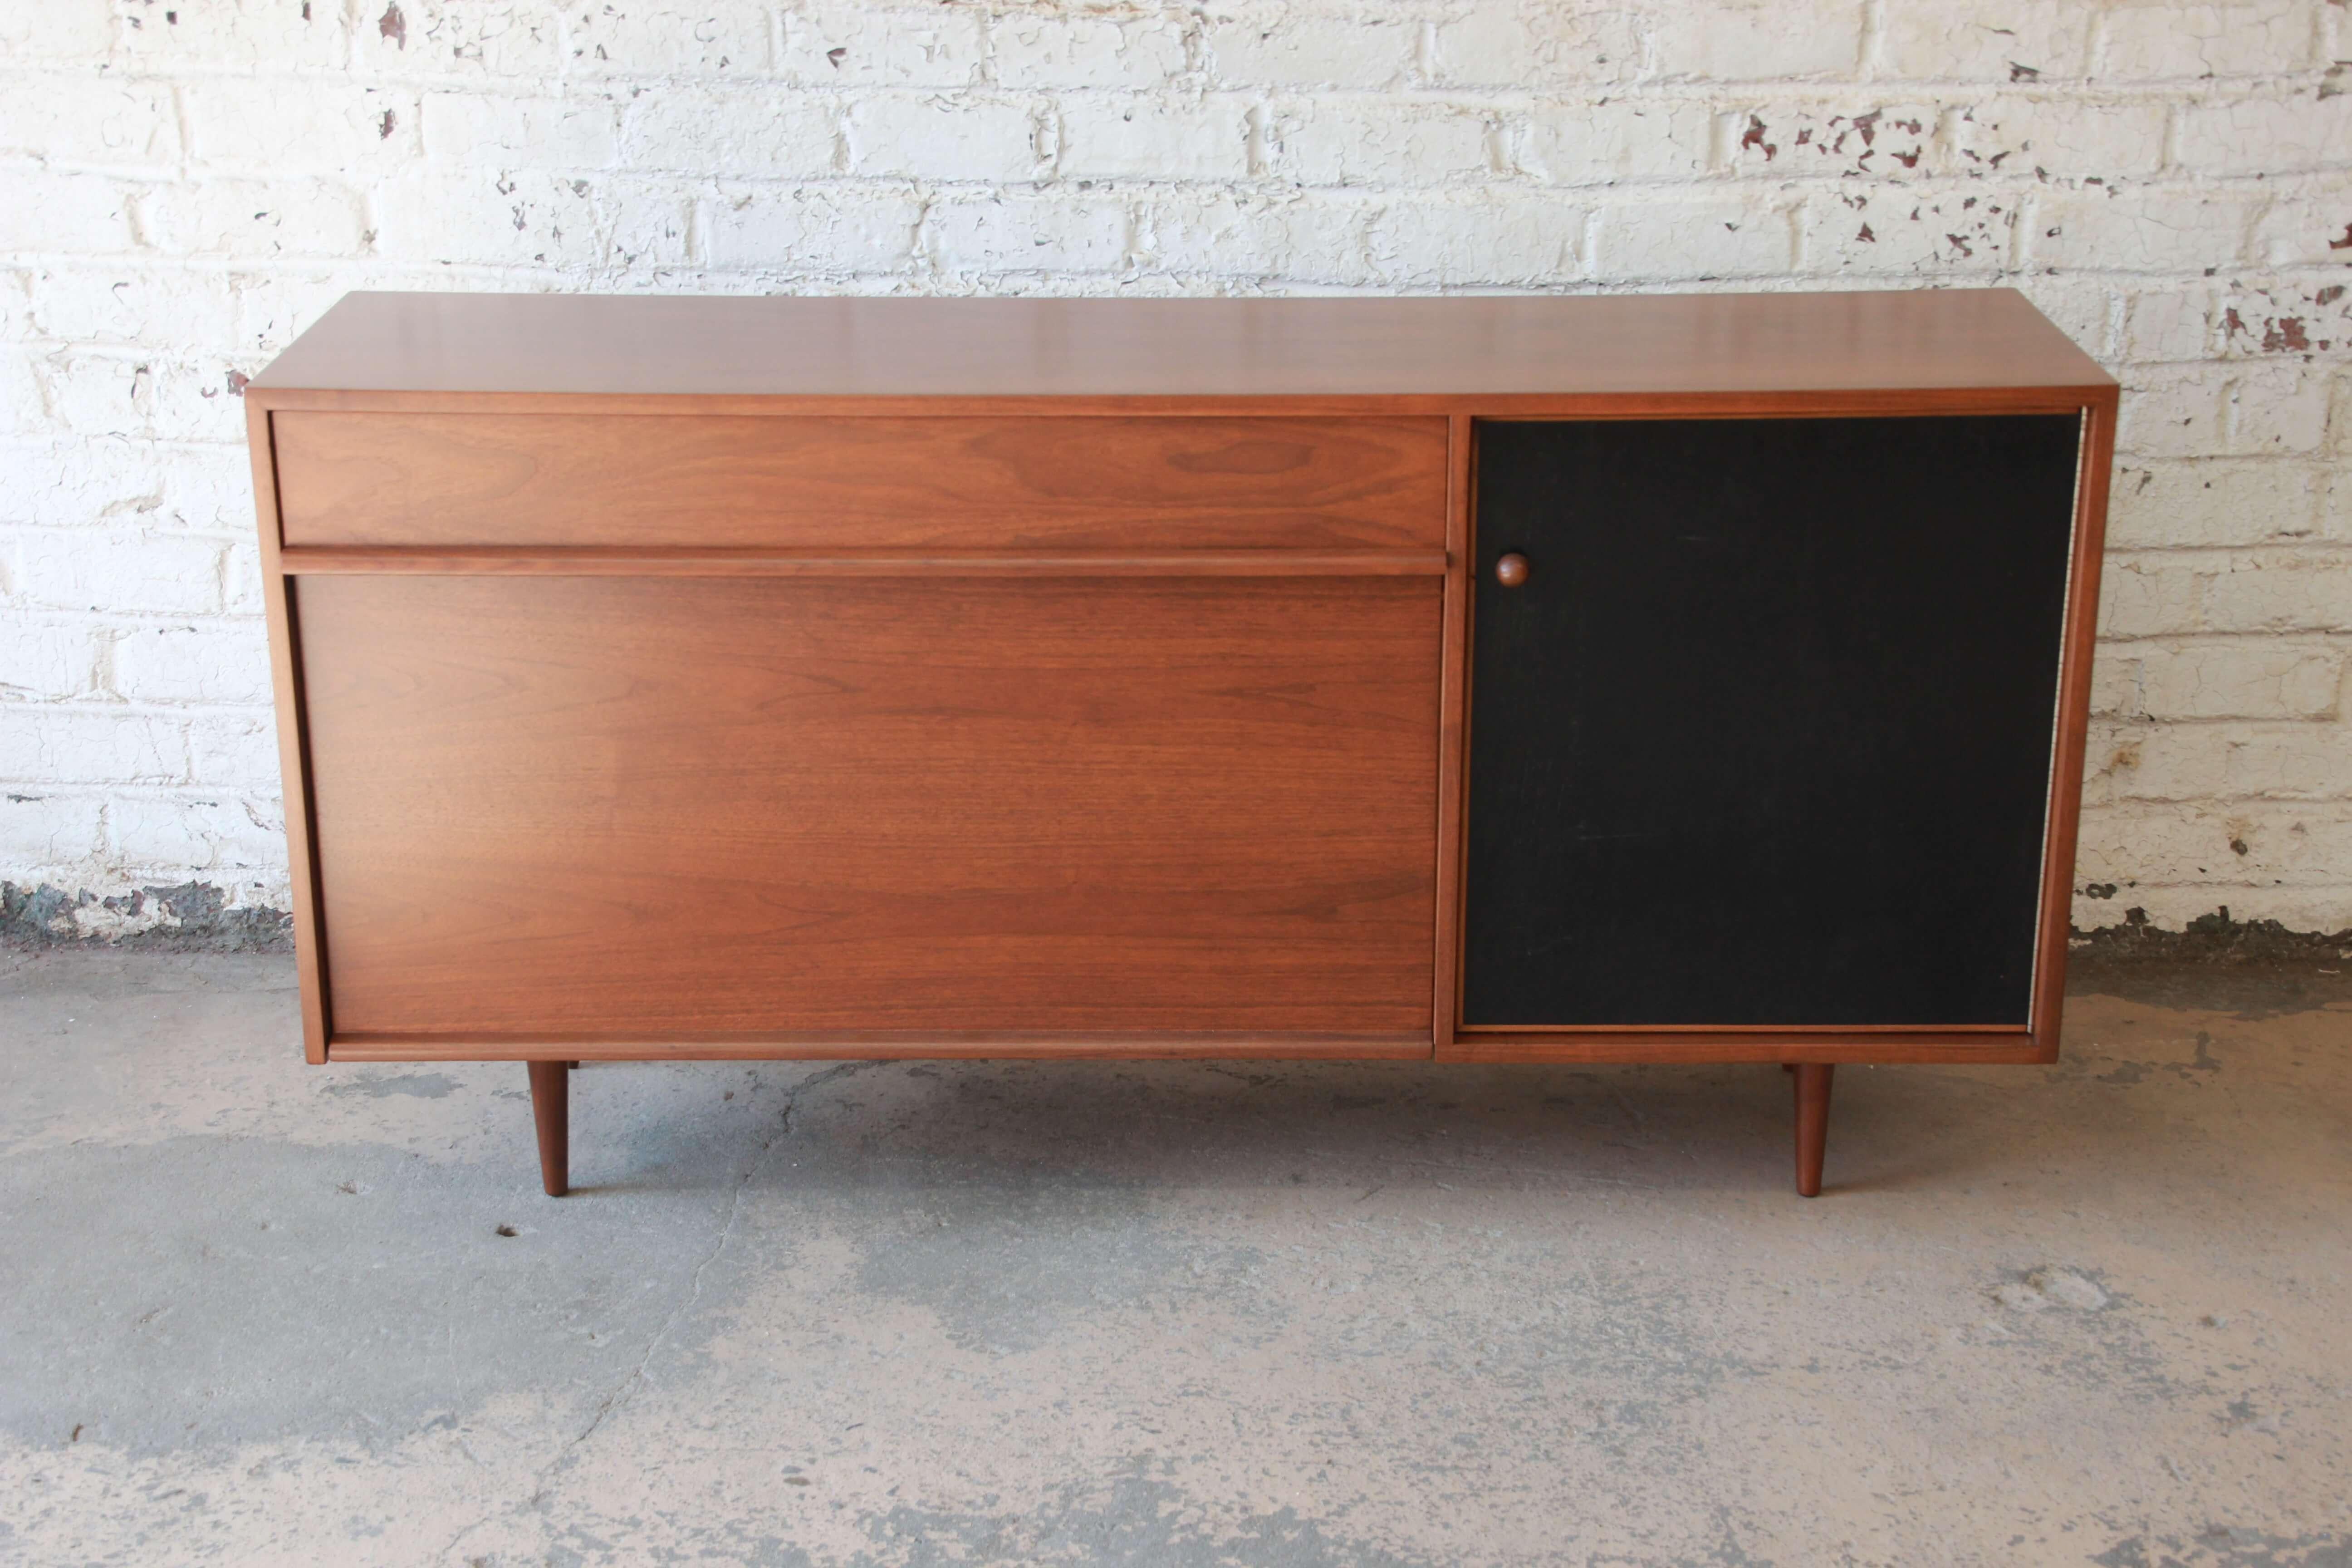 Offering a very nice walnut sideboard credenza by Milo Baughman for Glenn of California. The credenza has a very nice walnut wood grain with an ebonized black cabinet door to the right. The door opens up to a drawer at top with a shelf and two